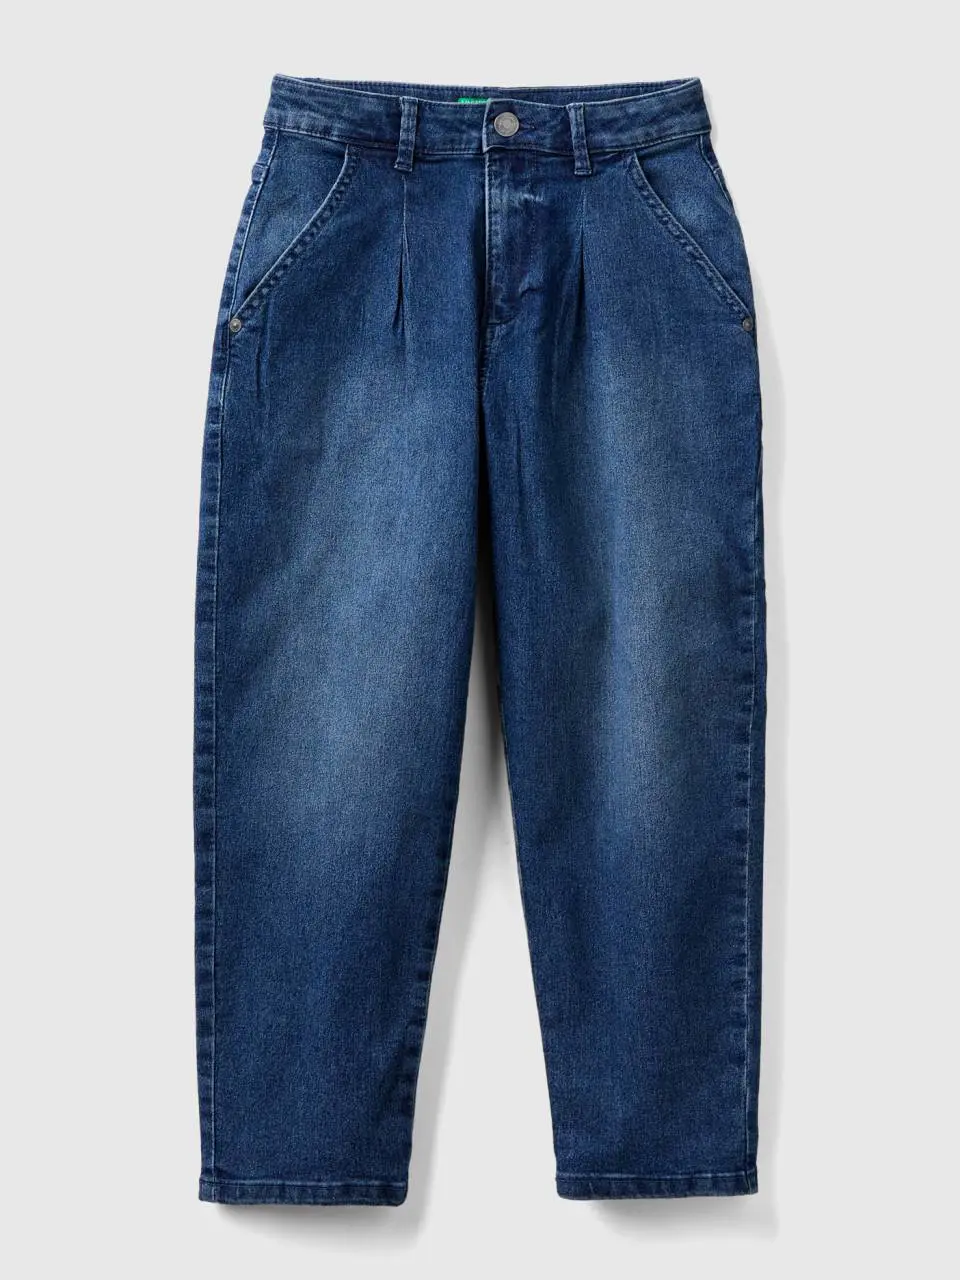 Benetton slouchy fit jeans. 1